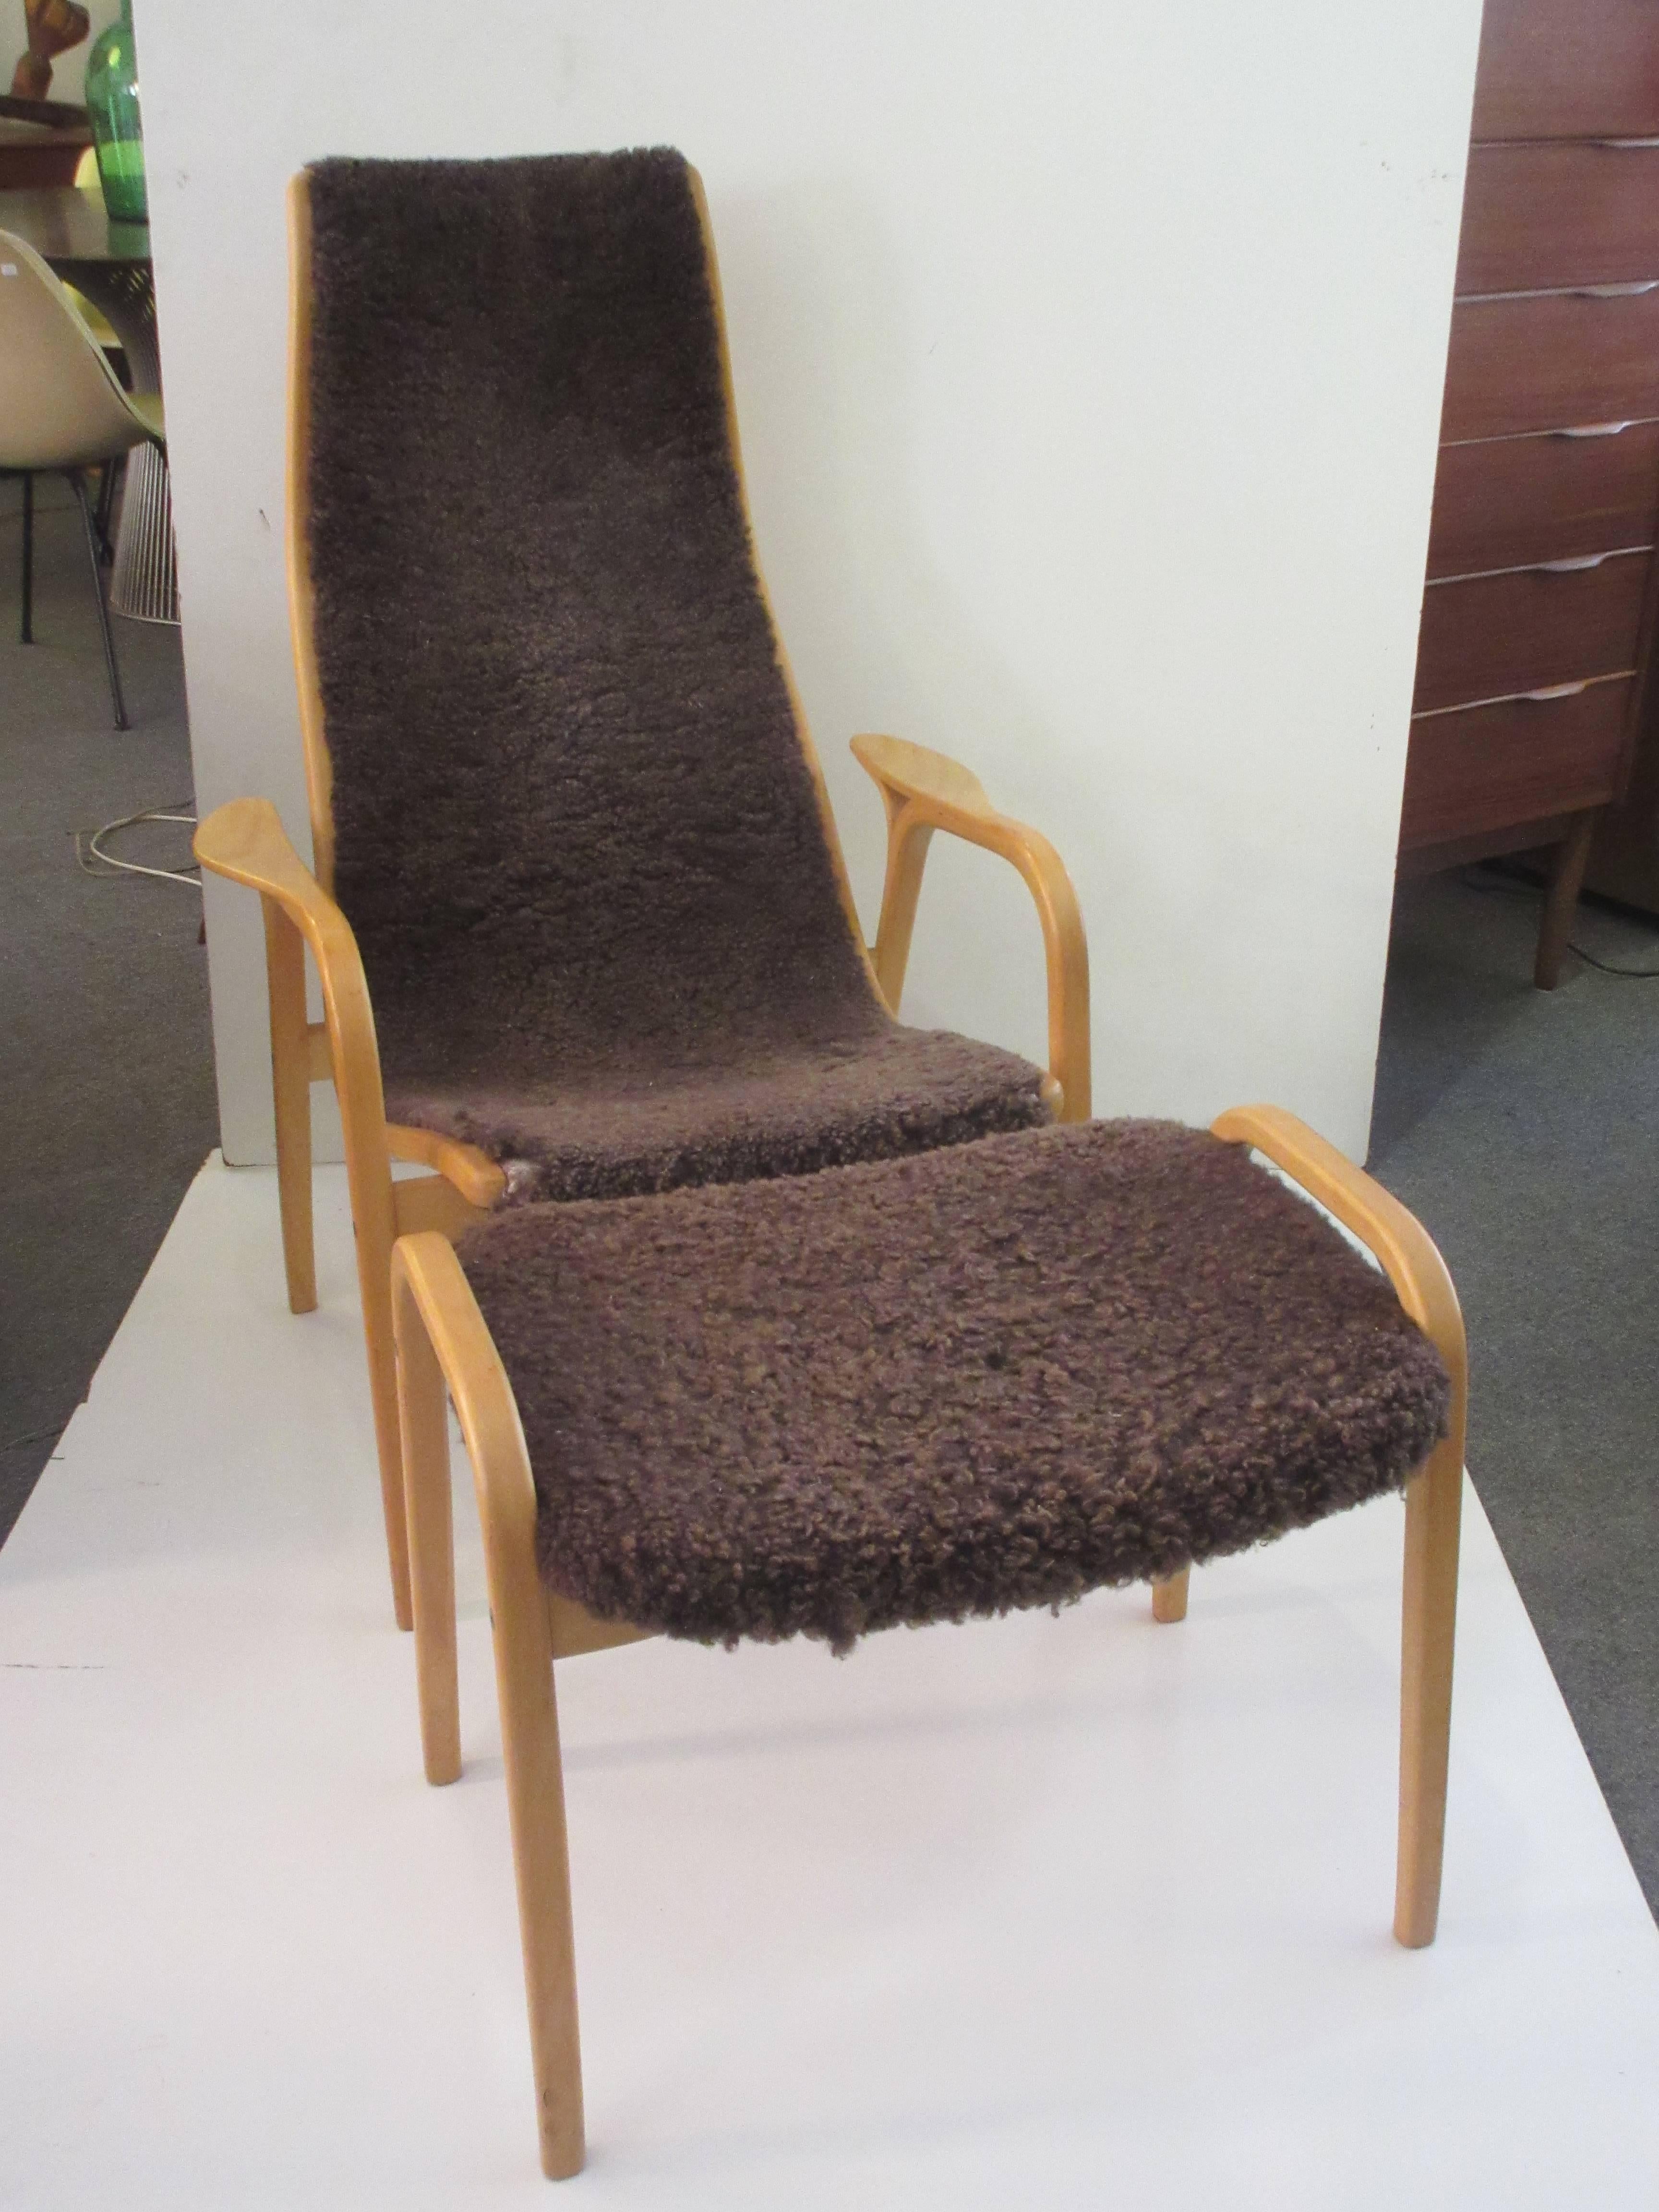 Yngve Ekstrom Lamino chair and ottoman by Swedese in brown sheep skin covering. Frames is of bent birch and both chair and ottoman have a branded label. This chair is completely original and in excellent condition. Lambs skin is just slightly worn